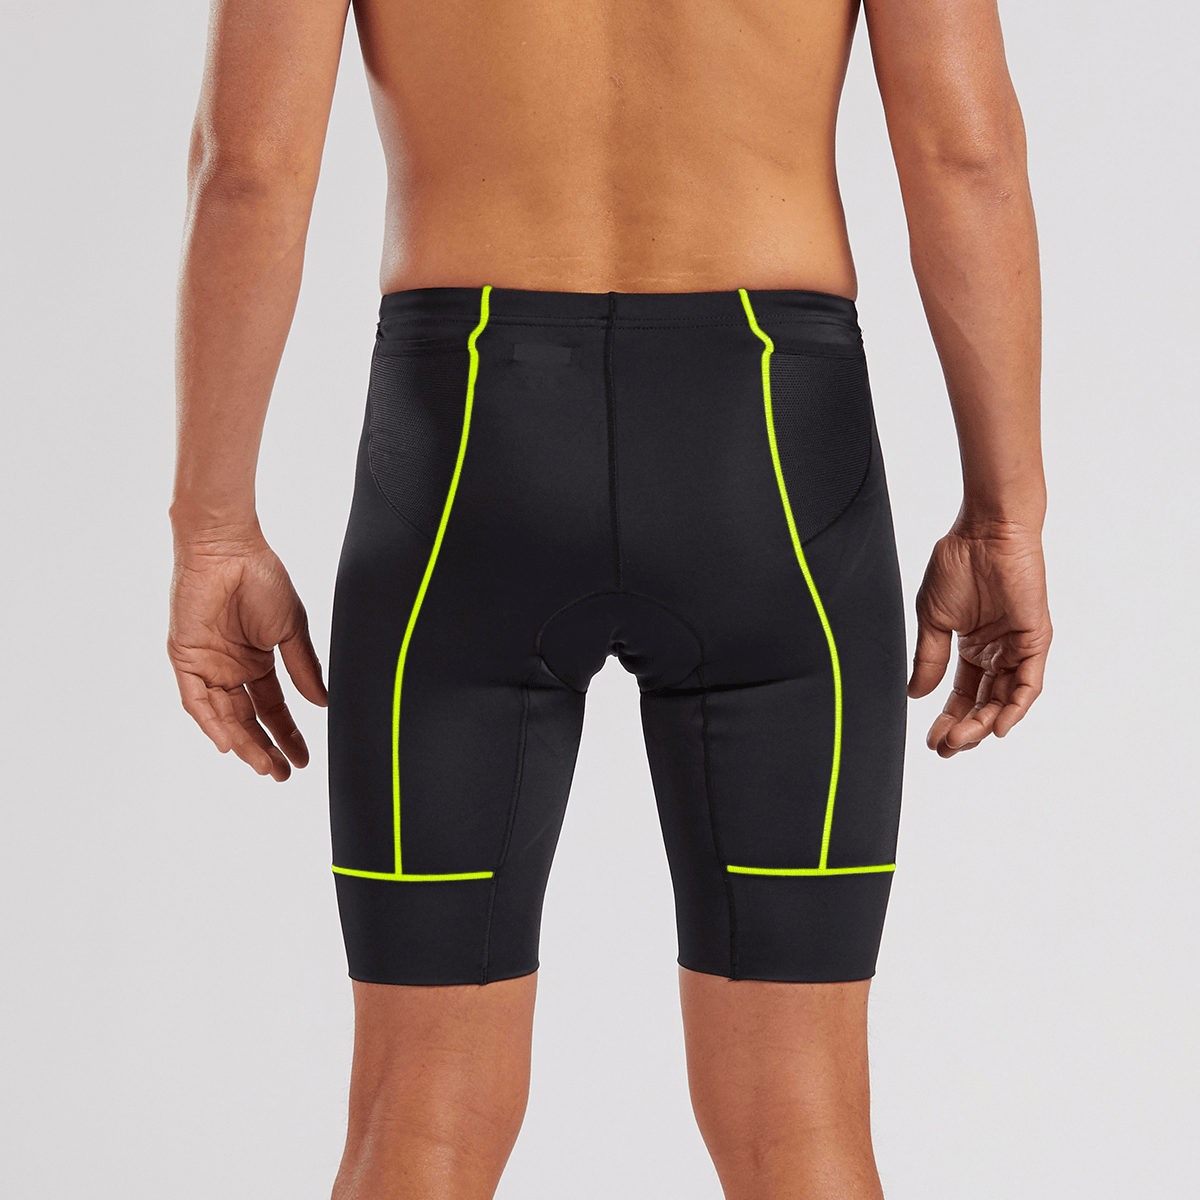 Zoot Sports TRI SHORTS MENS CORE TRI 9" SHORT - SAFETY YELLOW